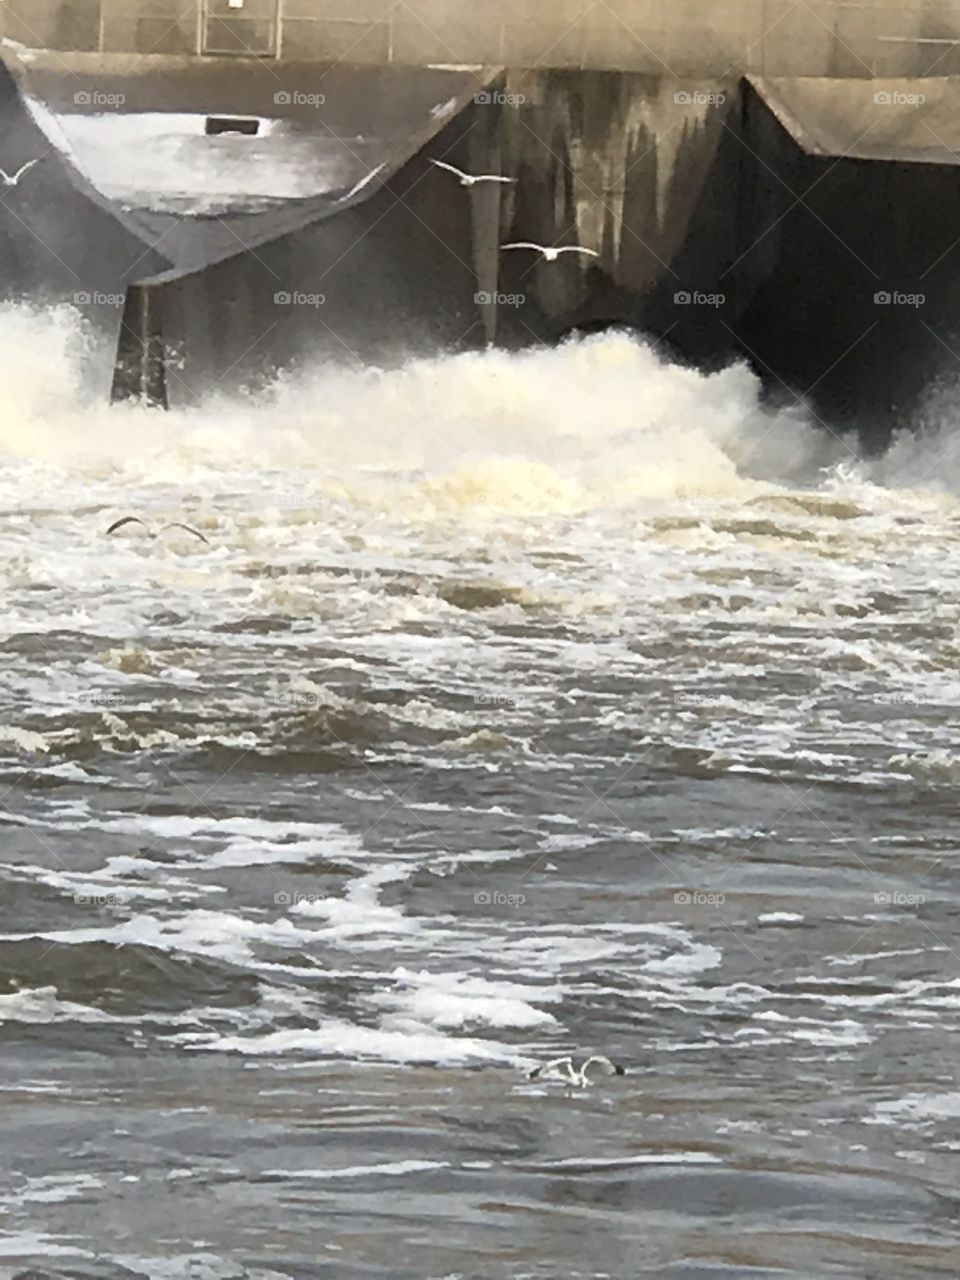 US Army Corps of Engineers, Verdigris River Park, Oologah Lake Dam, Oklahoma winter January powerful turbulence at flood gates water release with seagull birds searching surface for bait fish, white foam on water and mist in the air